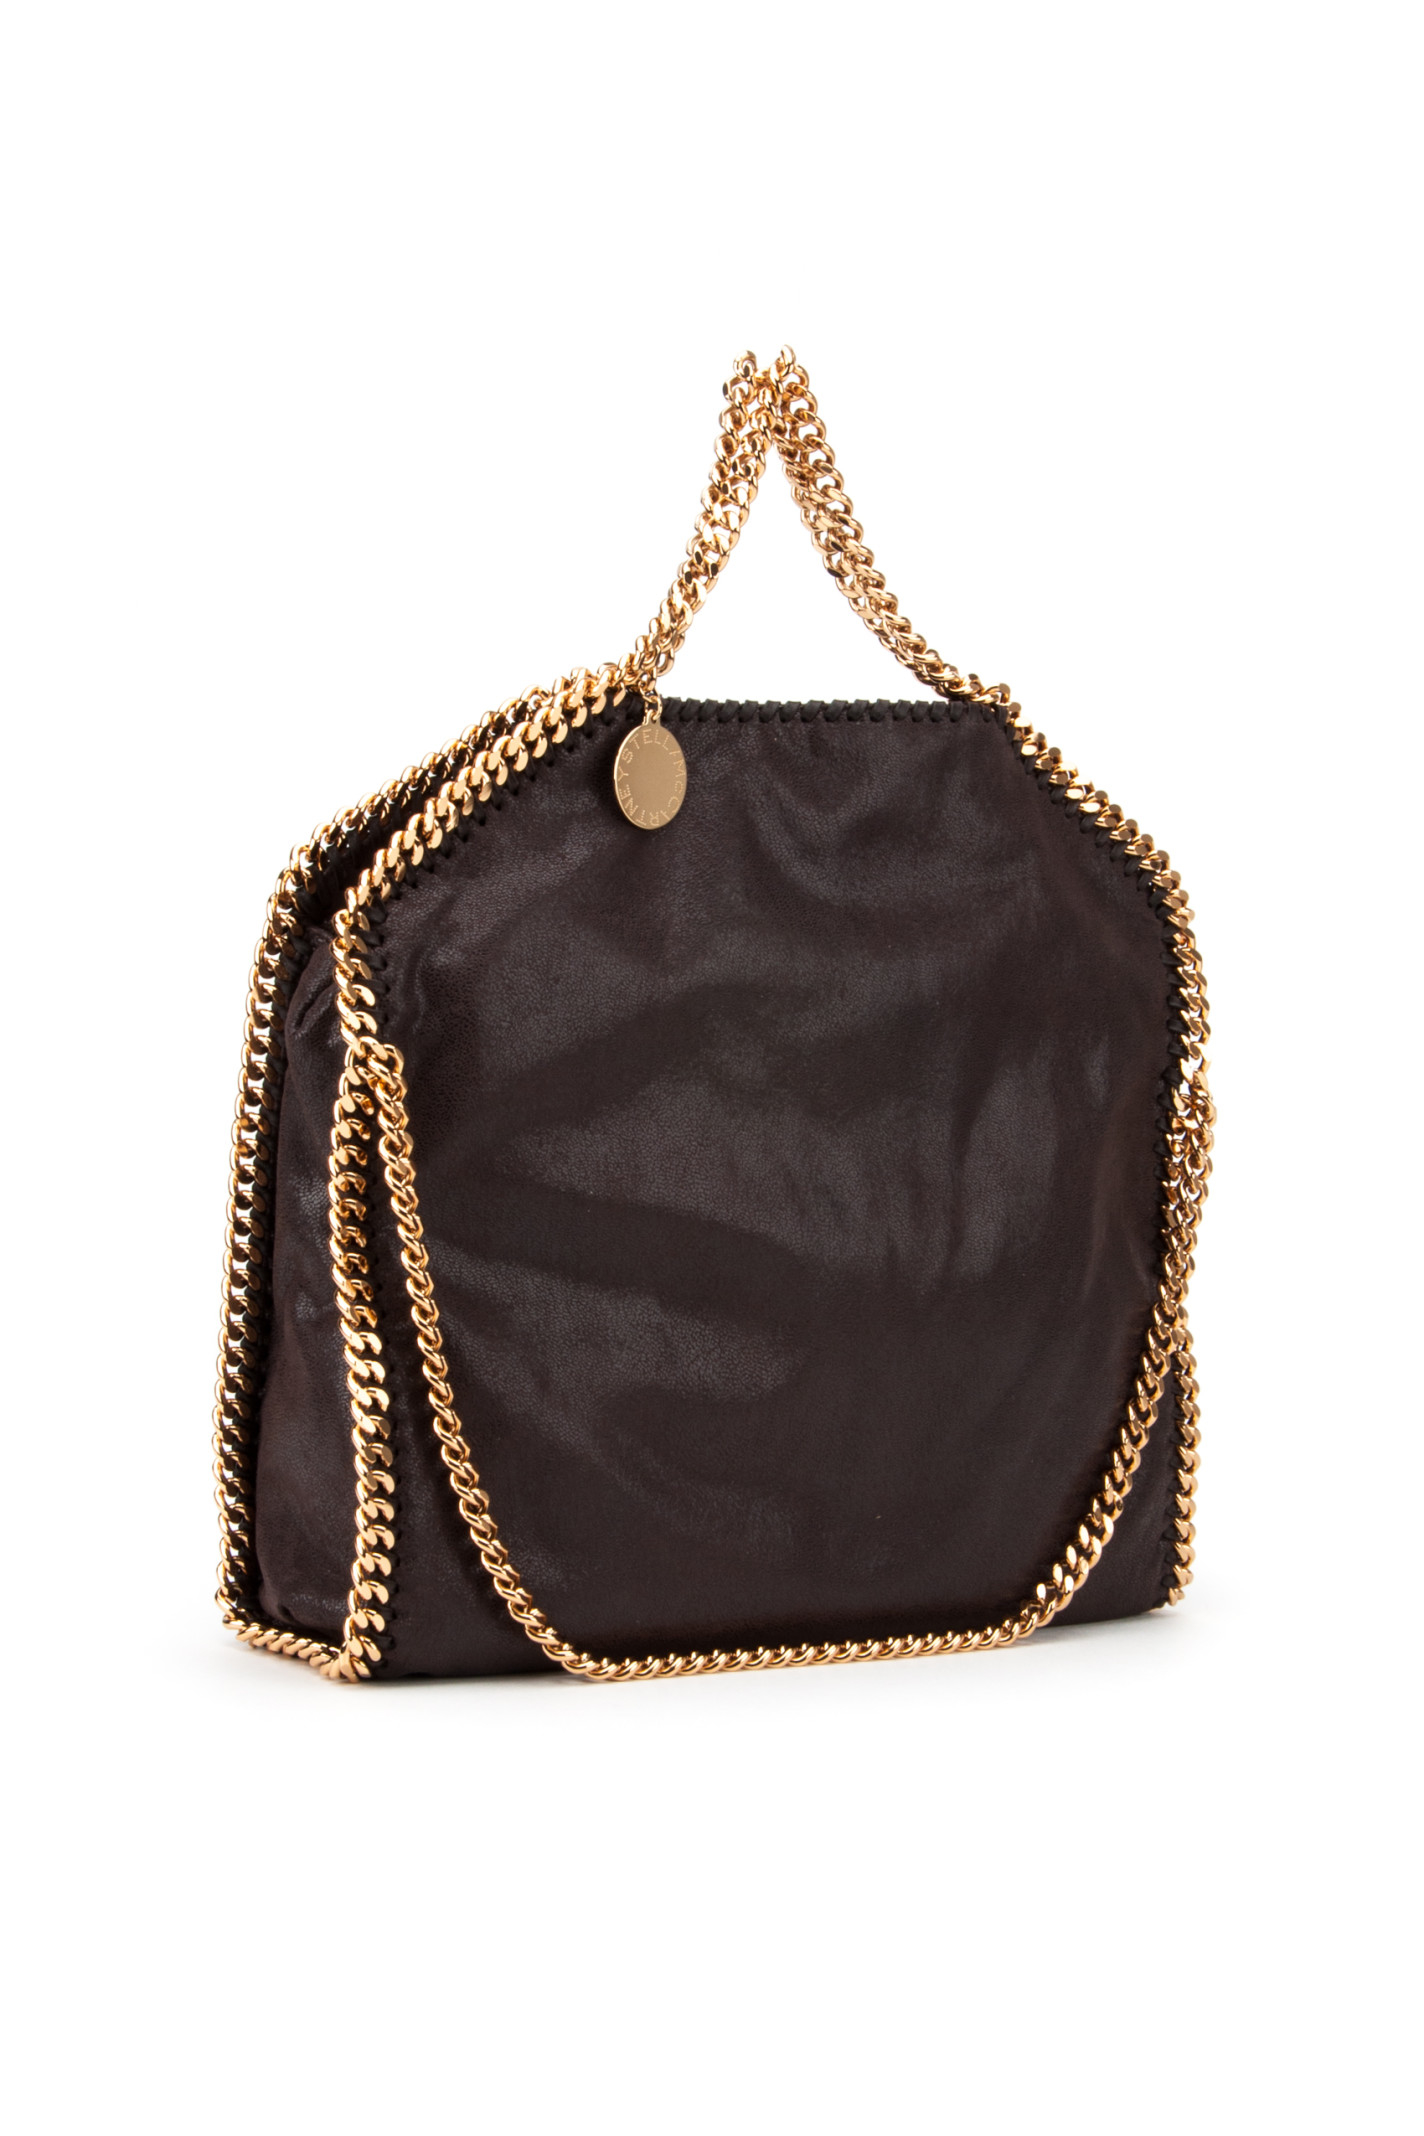 Stella mccartney Small Tote Shaggy Deer Gold Chain Bag in Brown (COFFEE) | Lyst